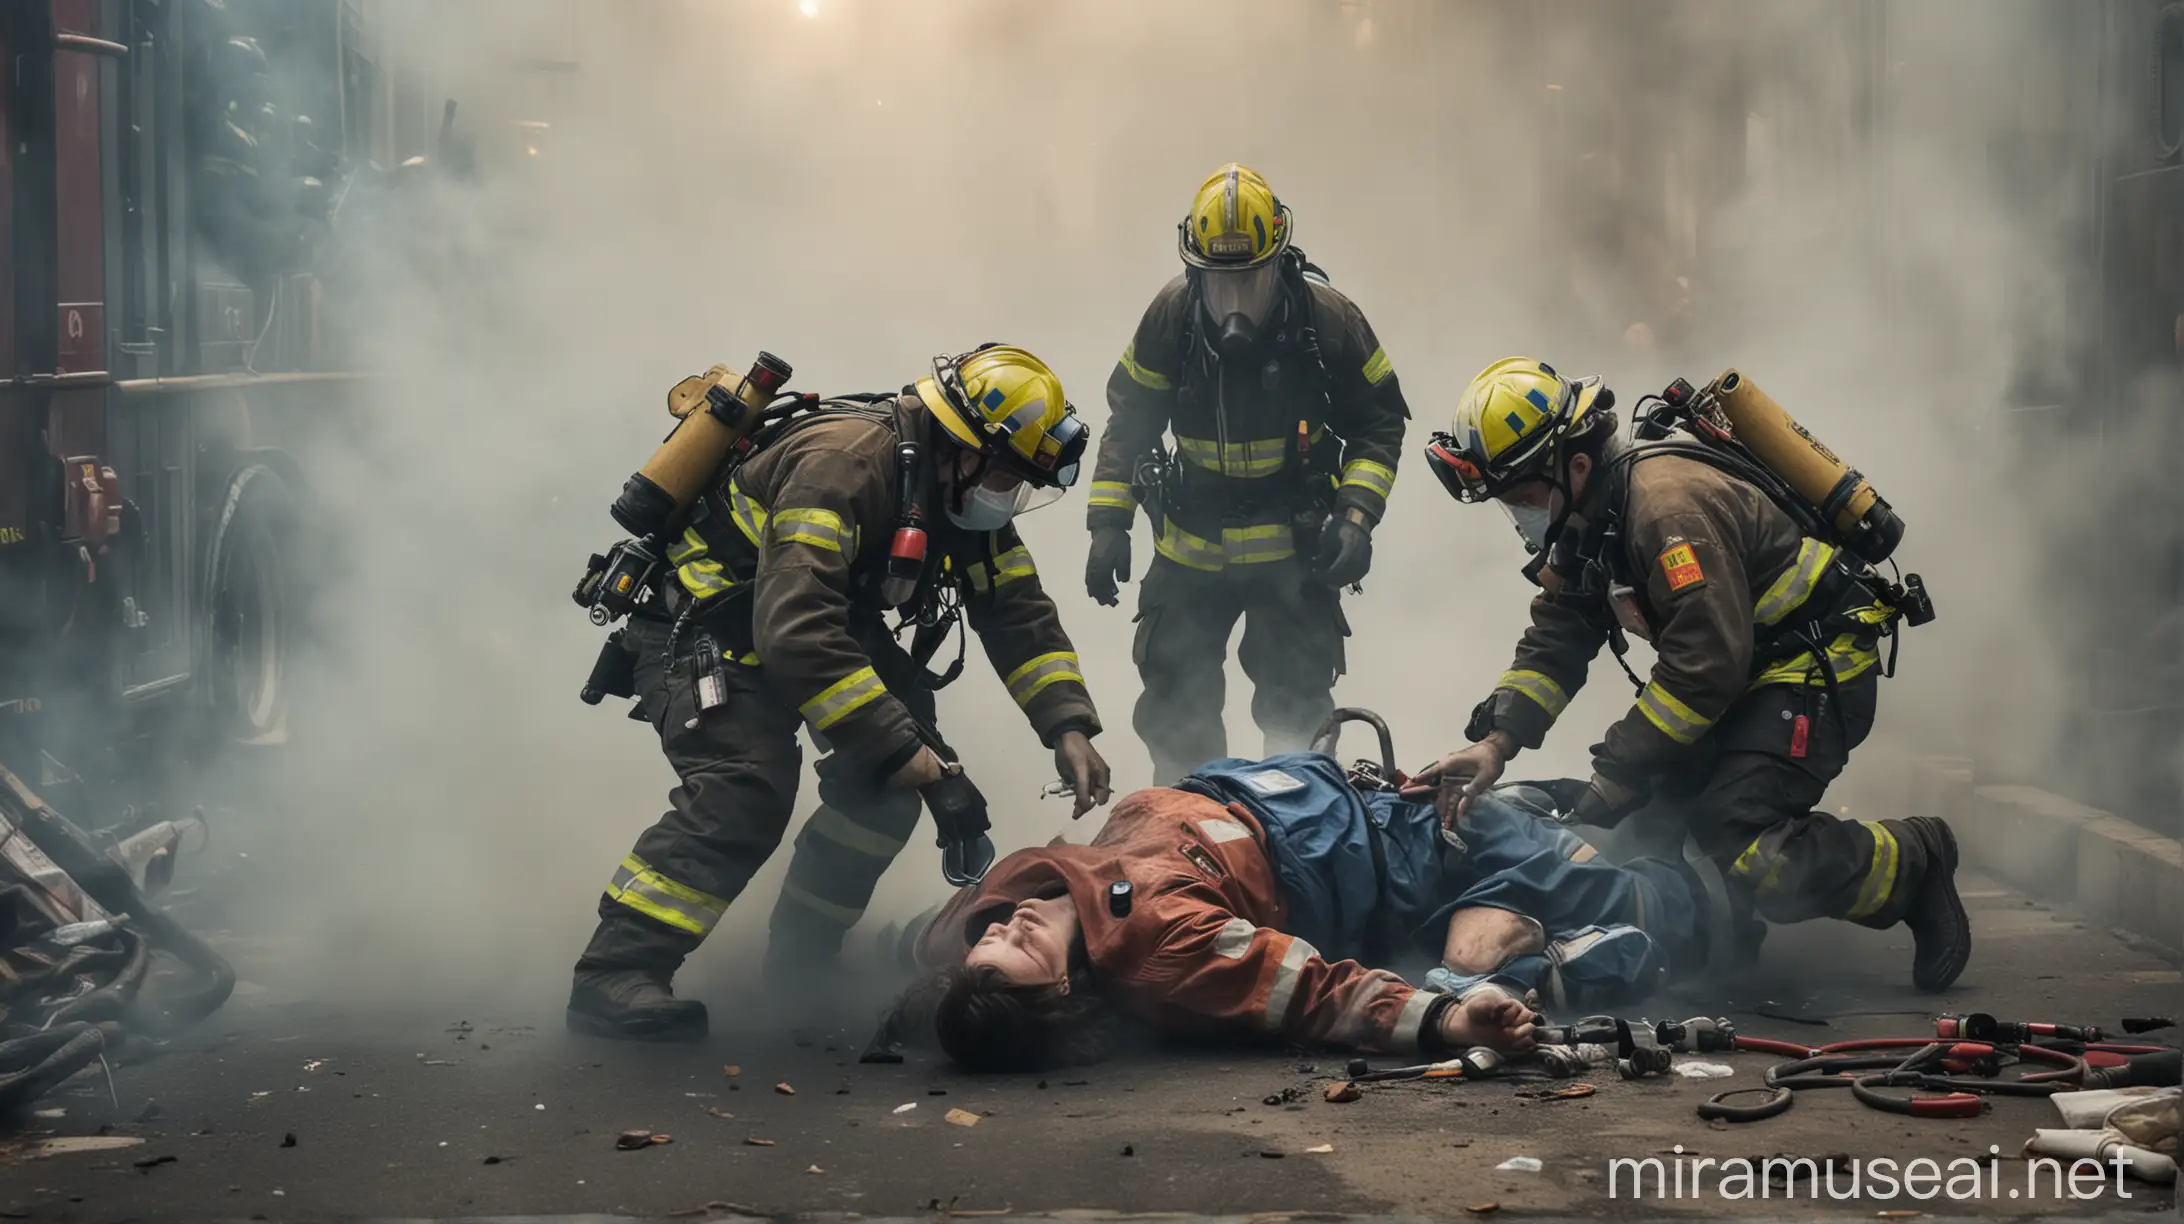 two paramedics treating an unconscious patient in an environment of chaos surrounded by smoke, firefighters and police